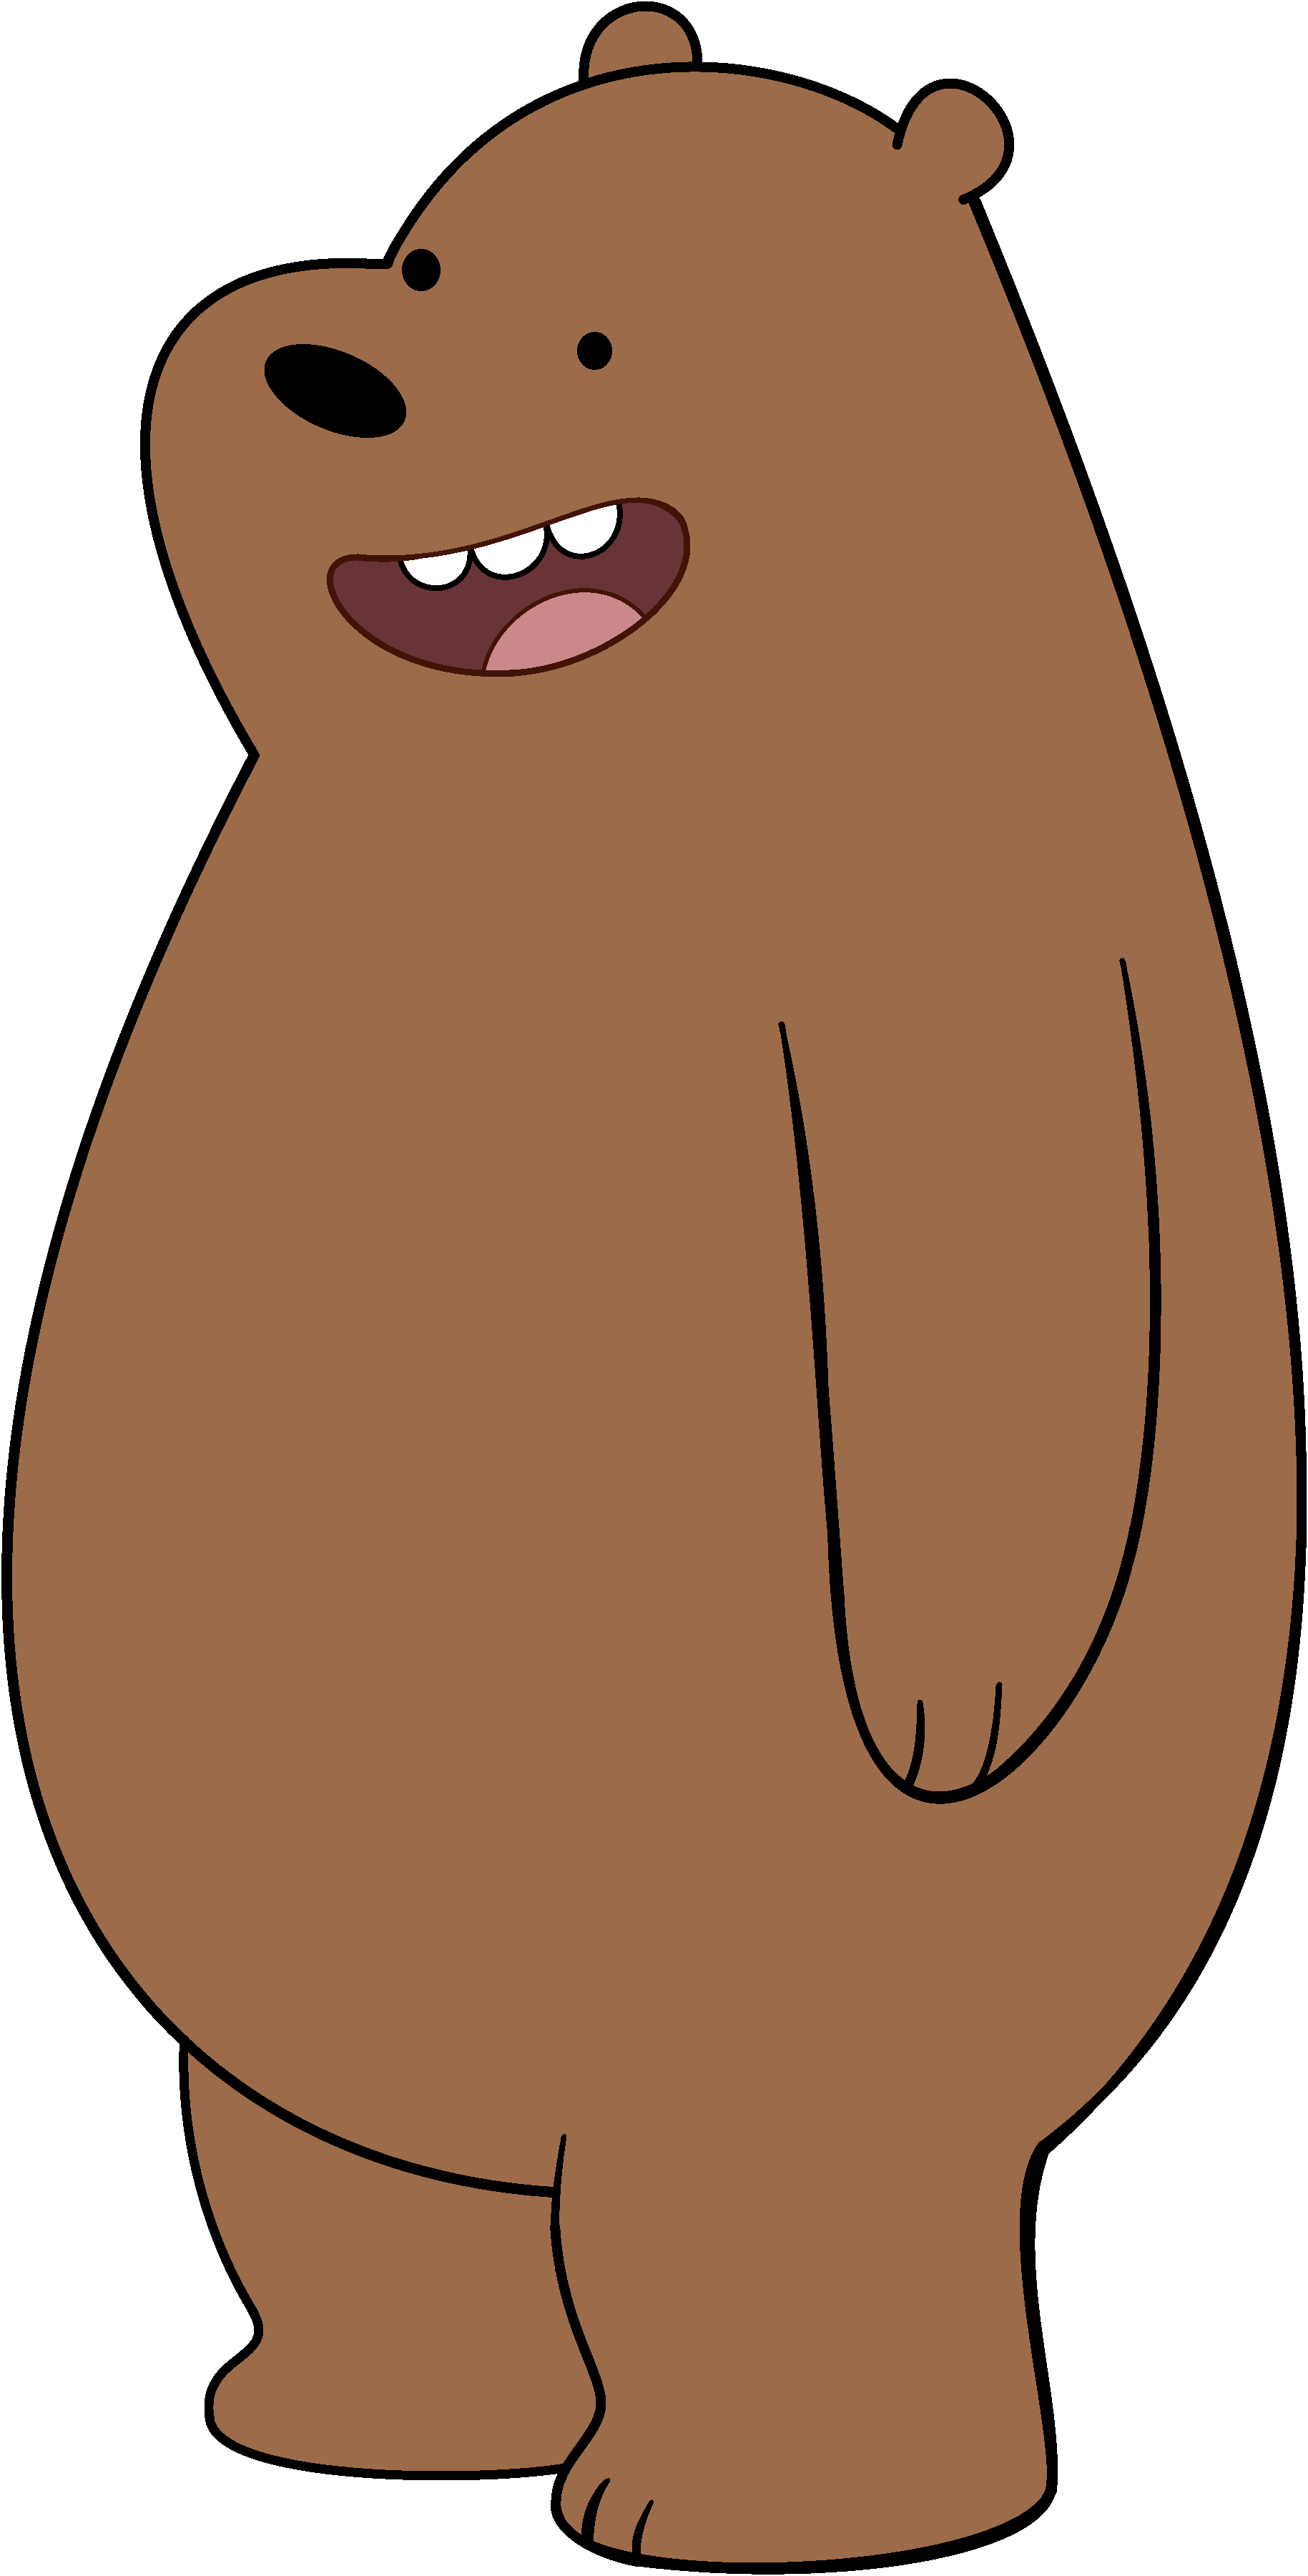 We Bare Bears Grizzly we bare bears 39033931 1829 3601